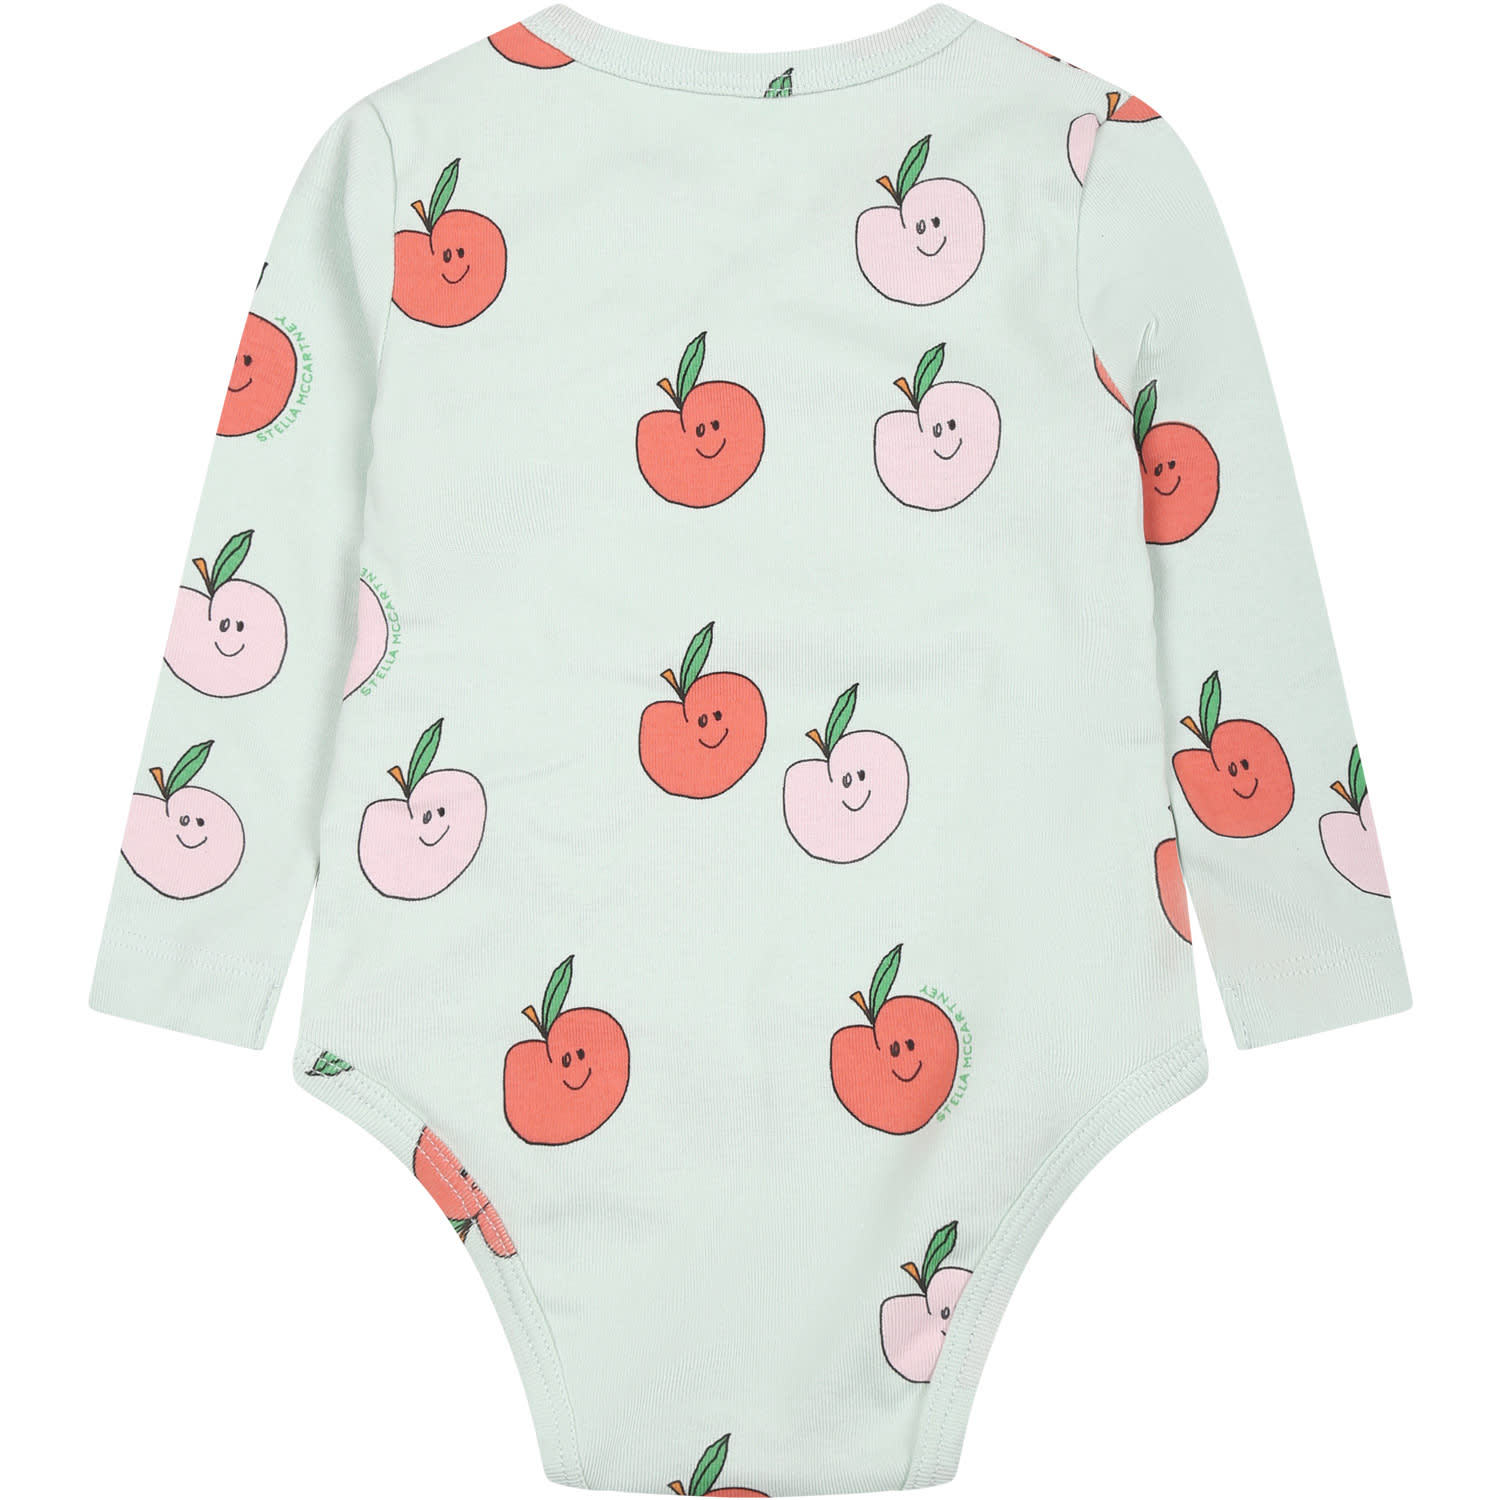 Shop Stella Mccartney Multicolor Set For Baby Girl With Apples